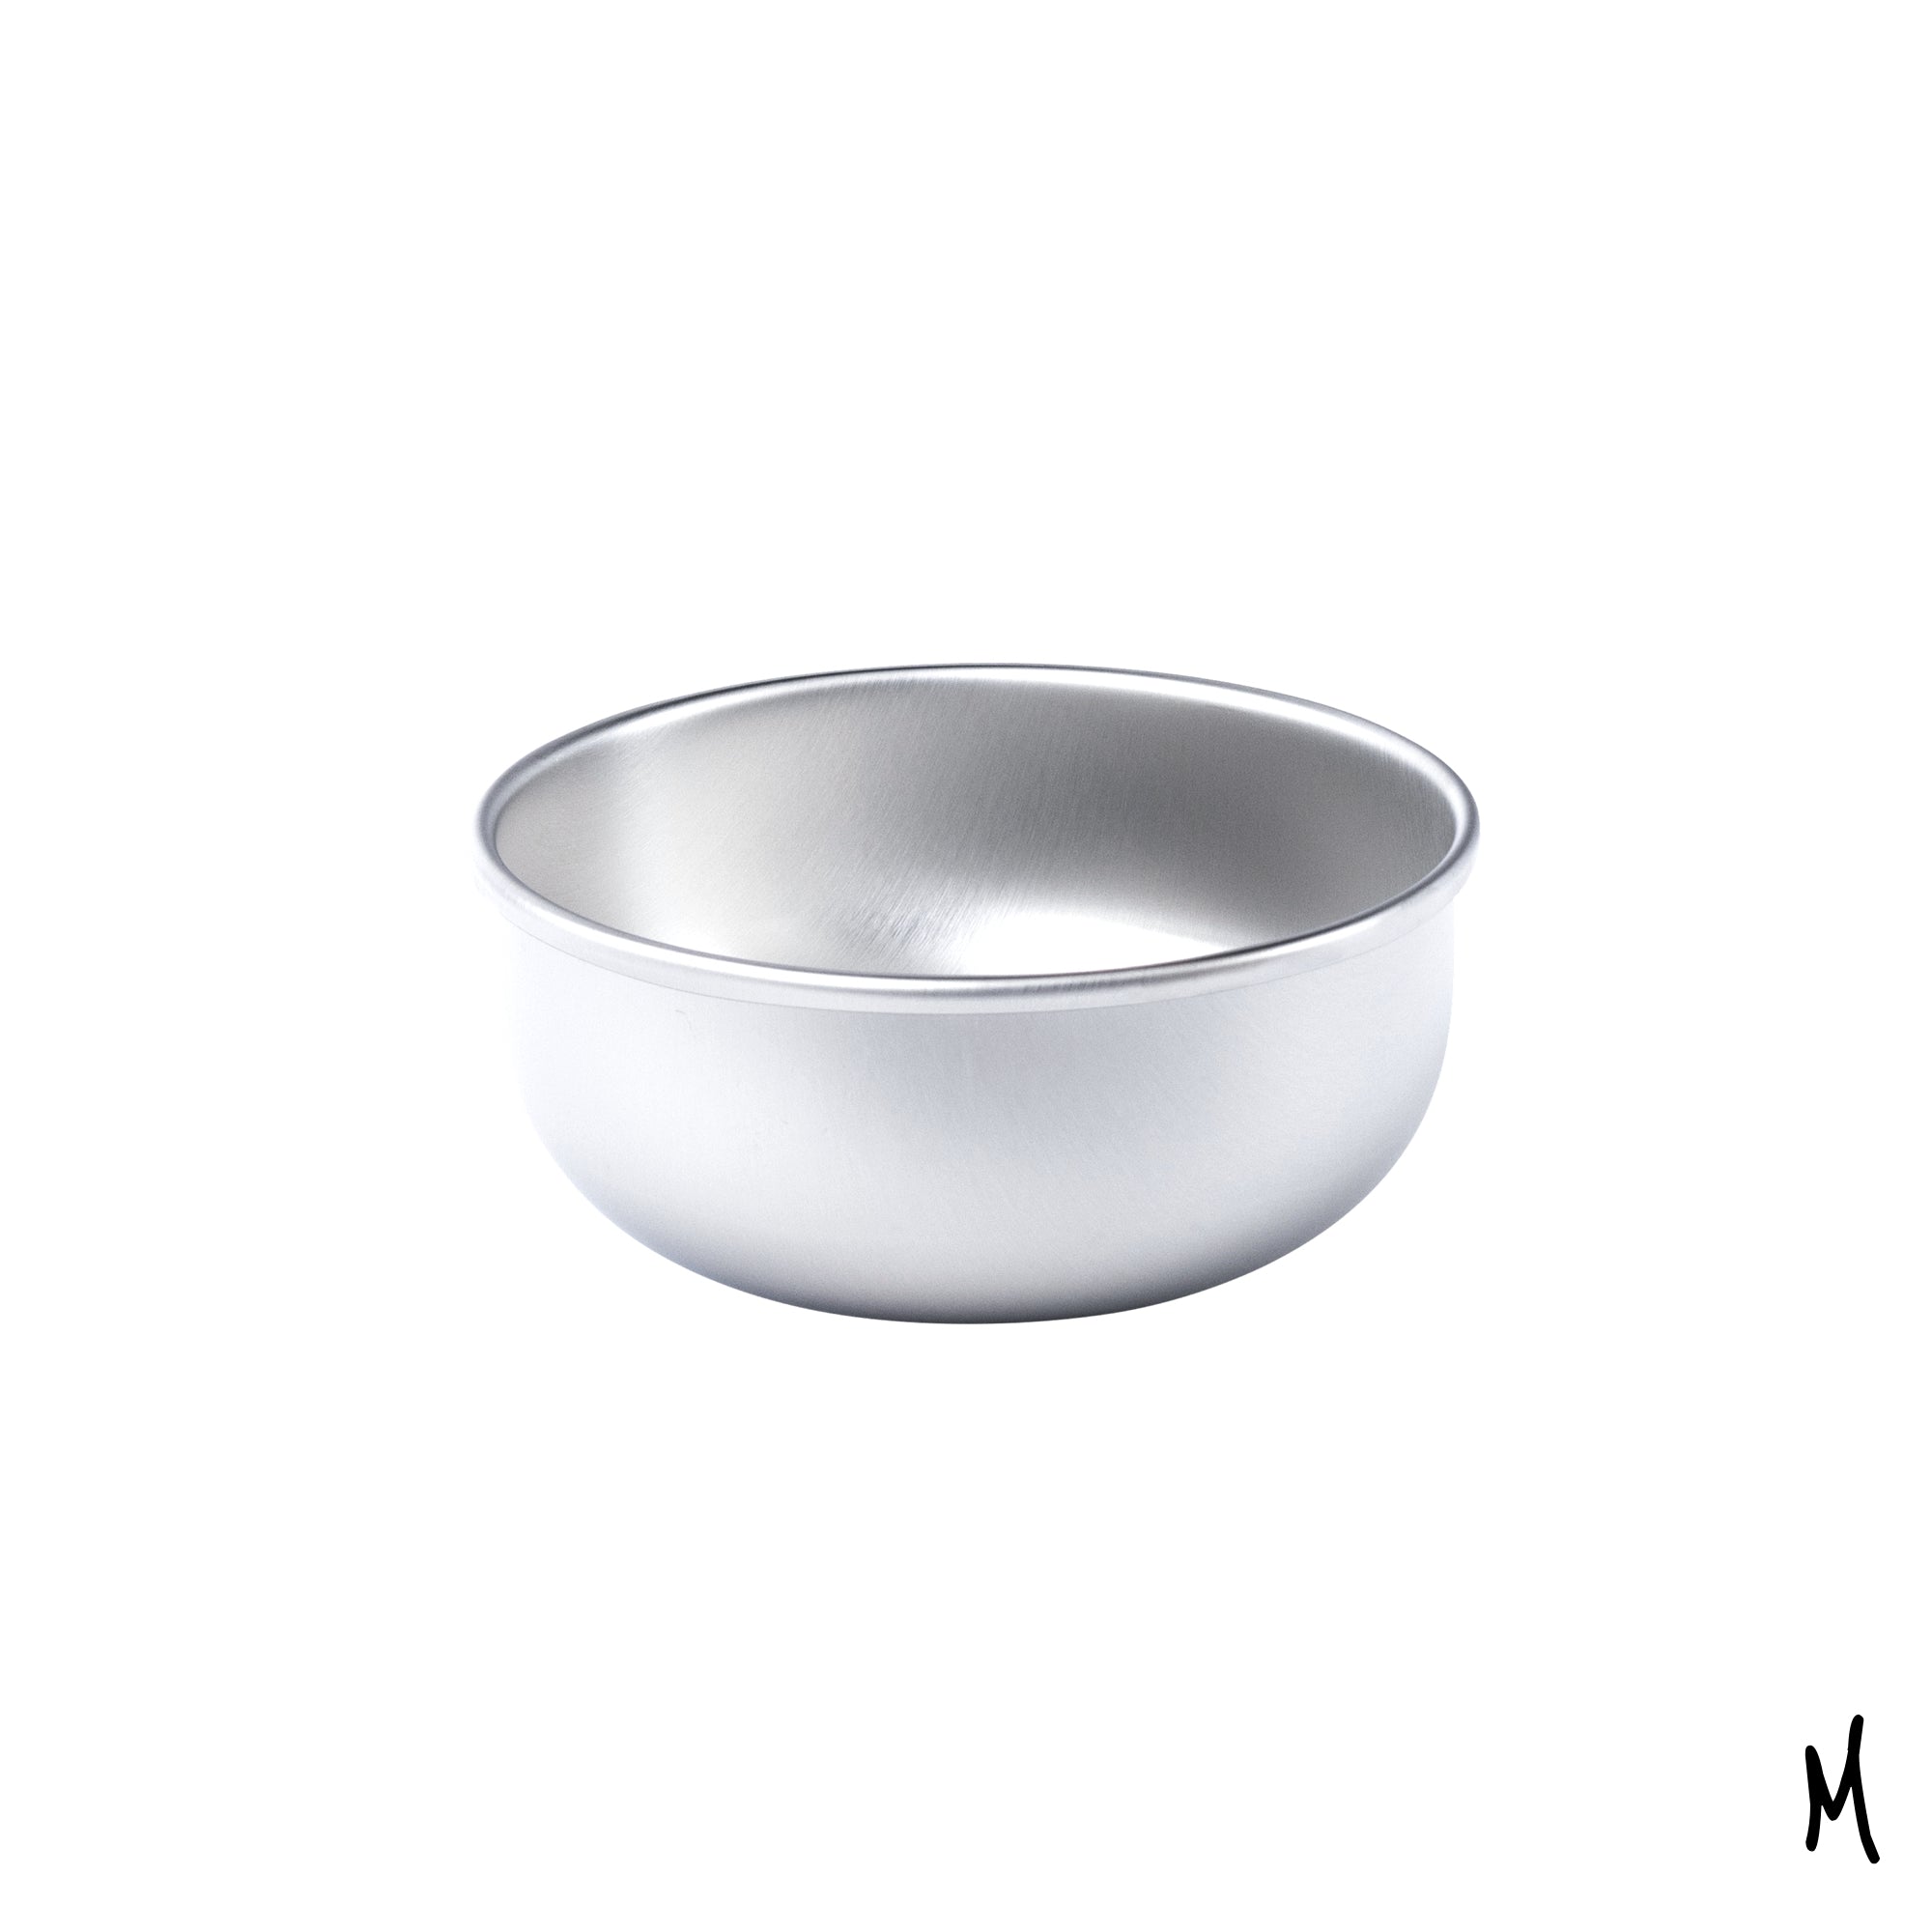 Basis Pet Stainless Steel Dog Bowls - Made in the USA